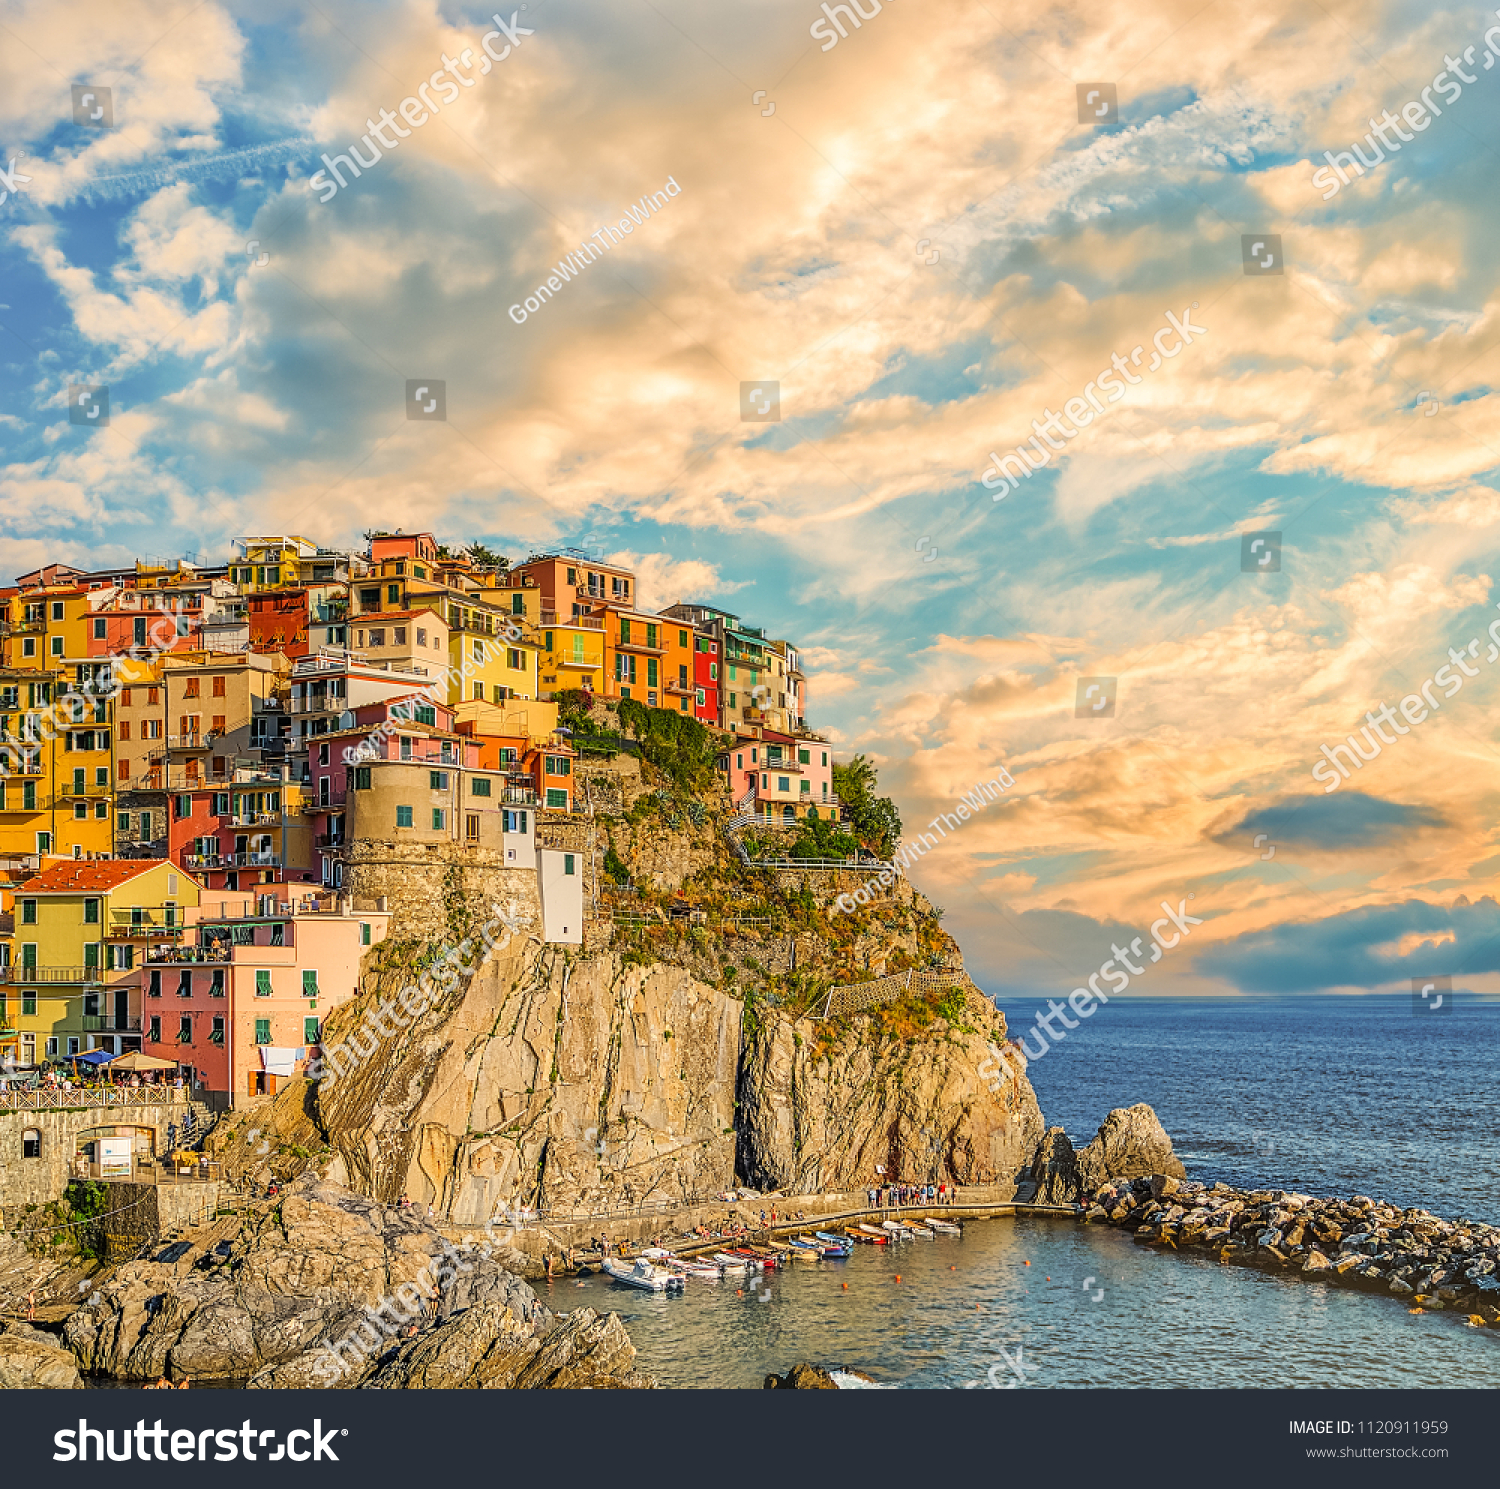 sunset on colorful fishing houses in Italian sea town #1120911959